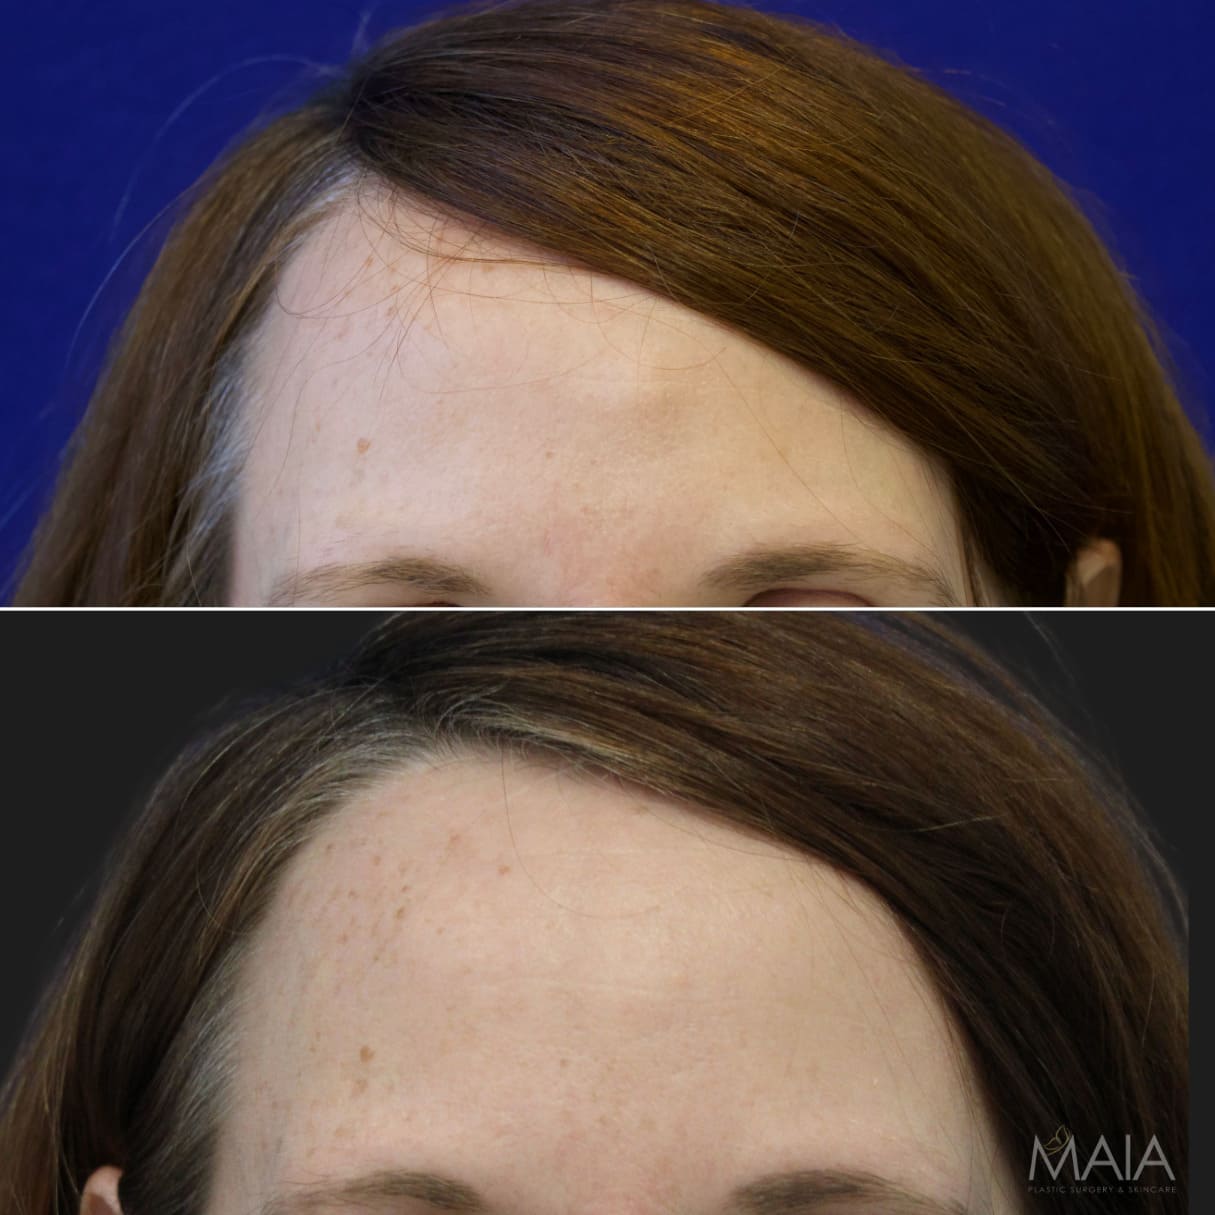 46 year-old female with forehead osteoma before and after osteoma removal